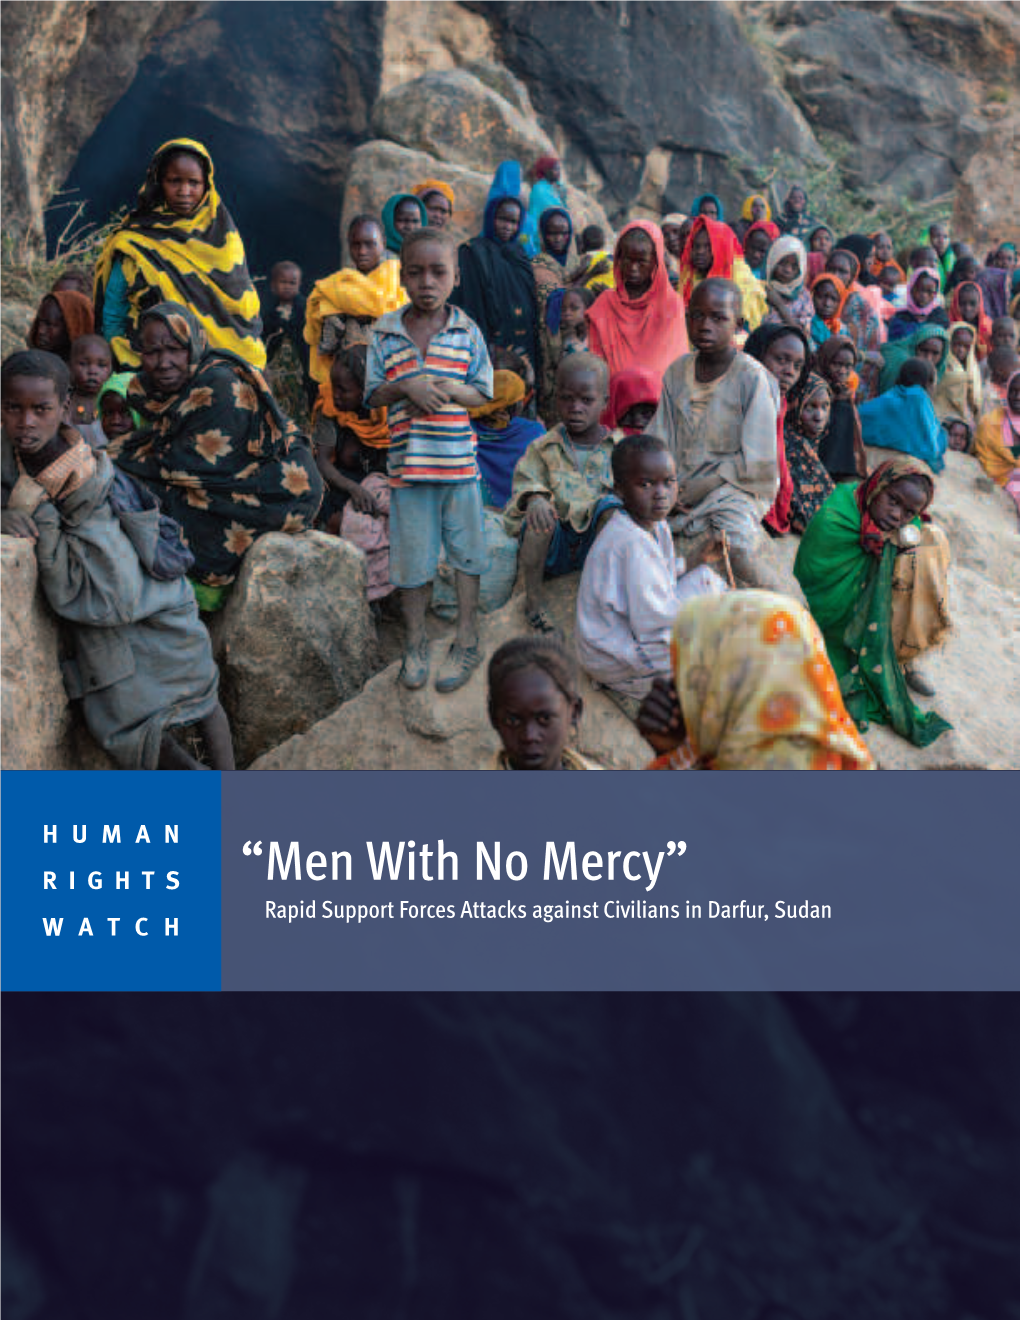 “Men with No Mercy” Rapid Support Forces Attacks Against Civilians in Darfur, Sudan WATCH